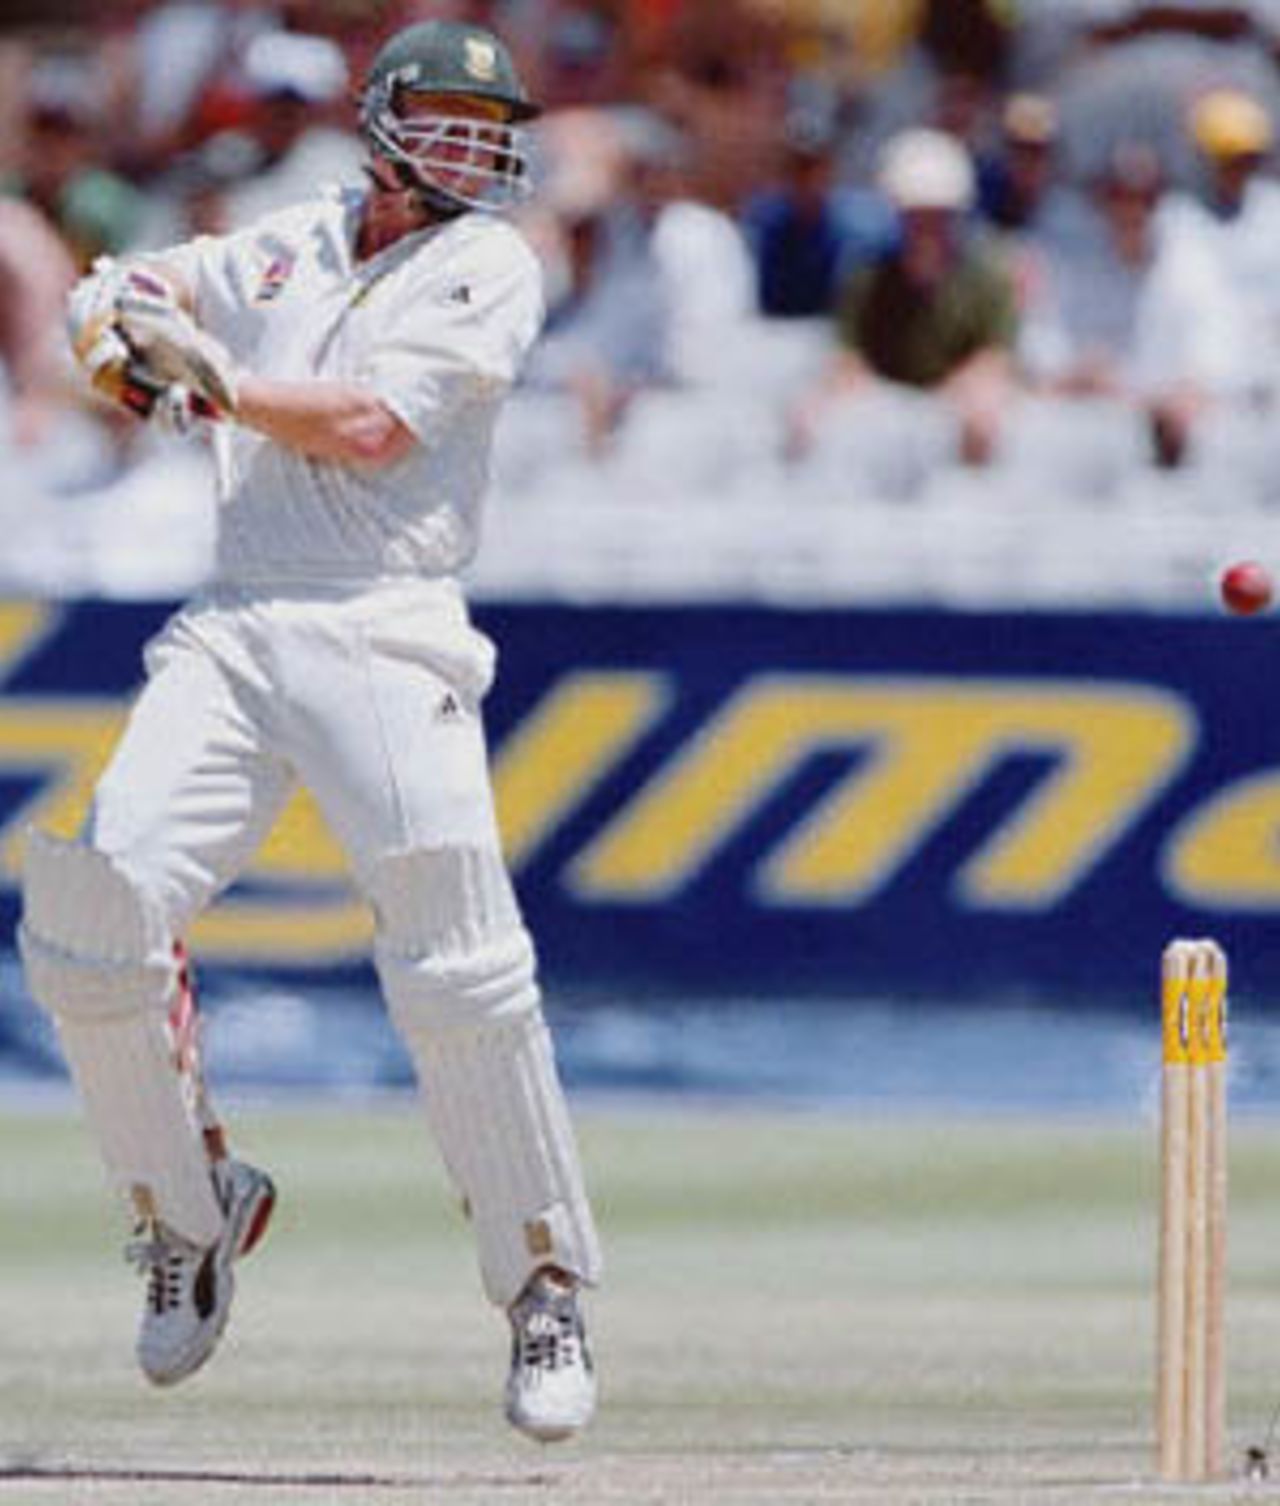 South African batsman Lance Klunser guards the wicket 04 January 2001 during the third day of the second test between South Africa and Sri Lanka played at the Newlands cricket ground in Cape Town.